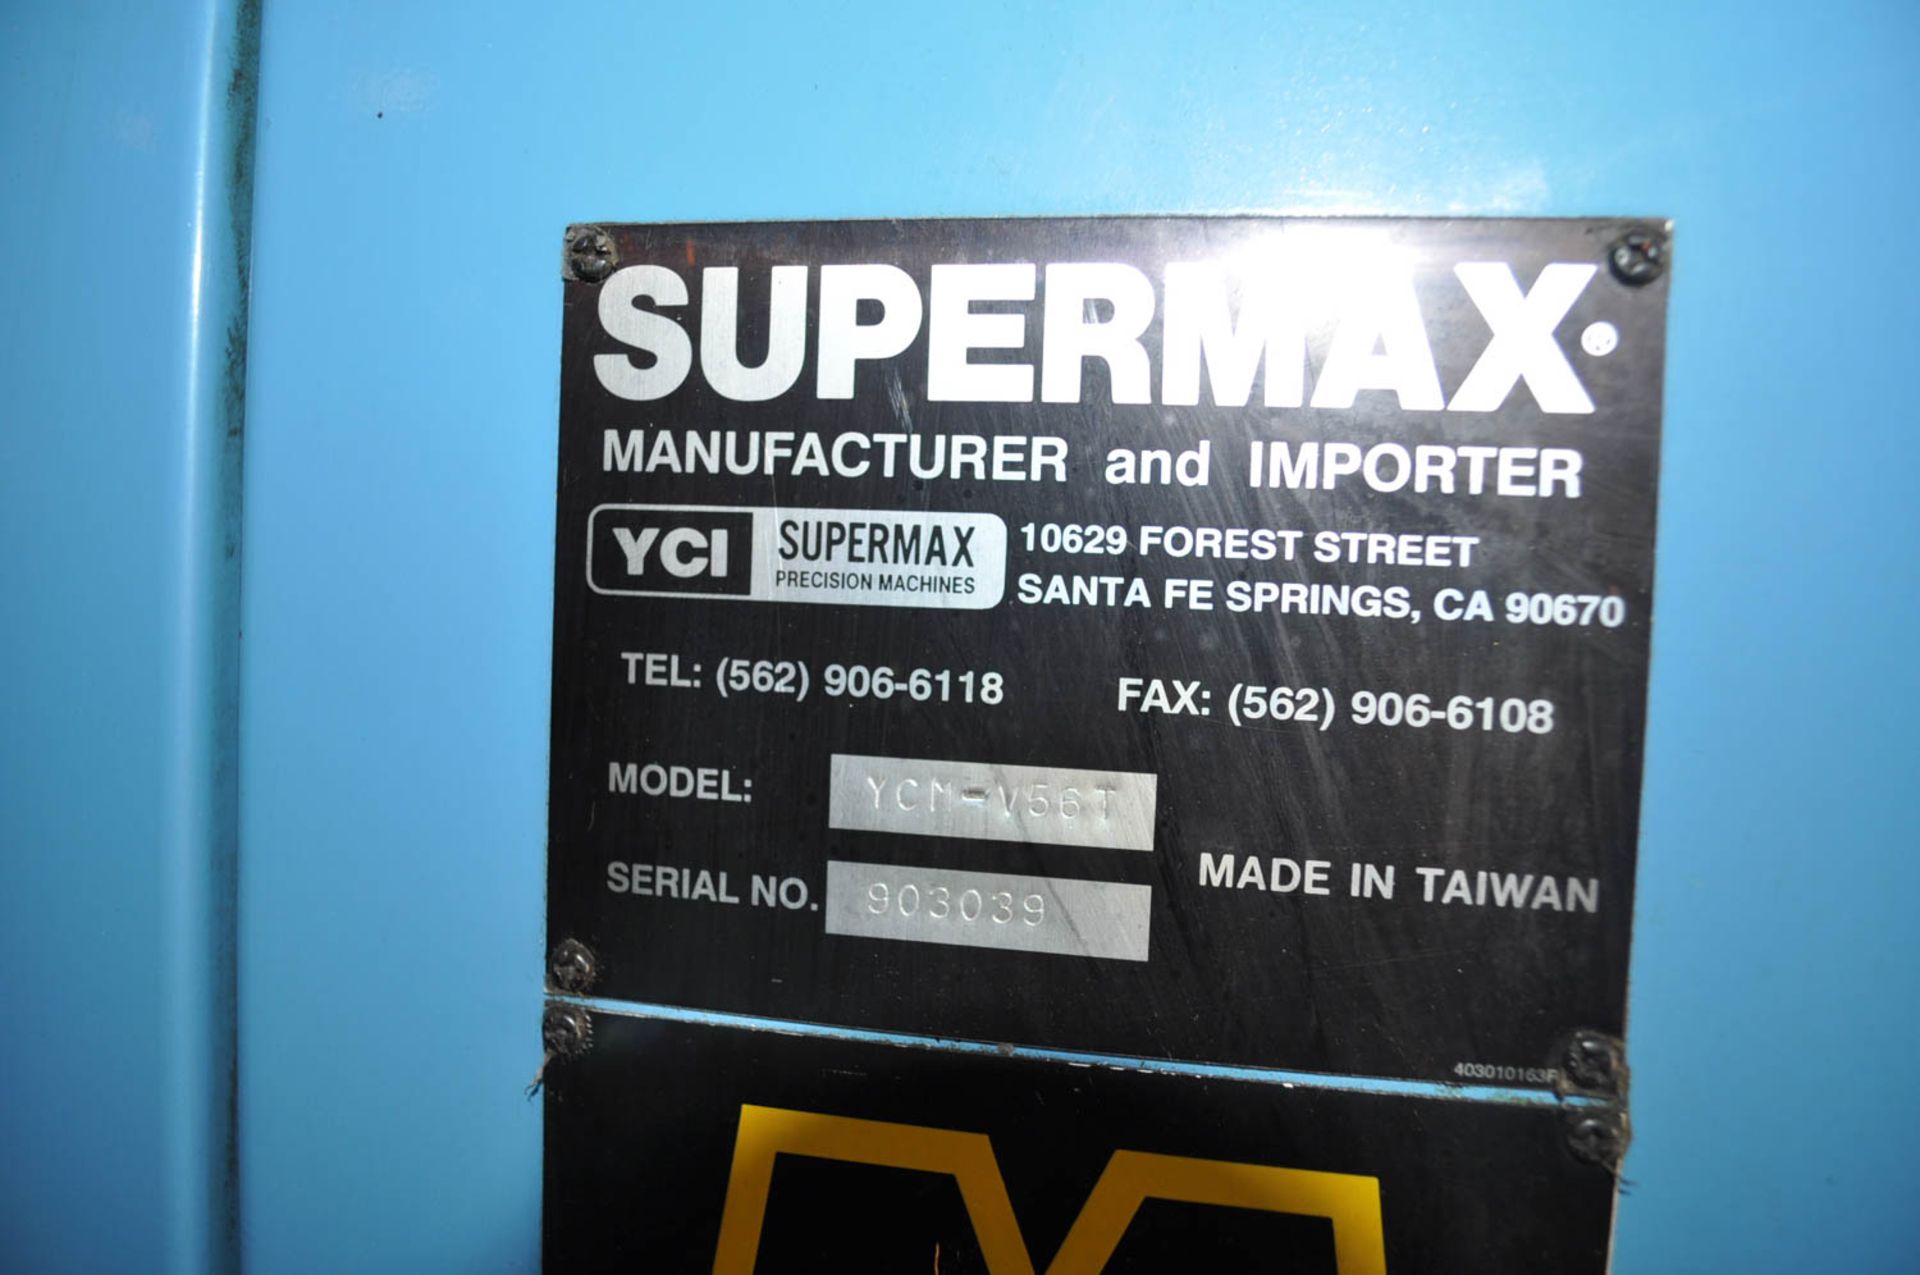 SUPERMAX MDL. V56T CNC VERTICAL MACHINING CENTER, TRAVELS: X-22", Y-16", Z-20", WITH 16-POSITION - Image 5 of 5